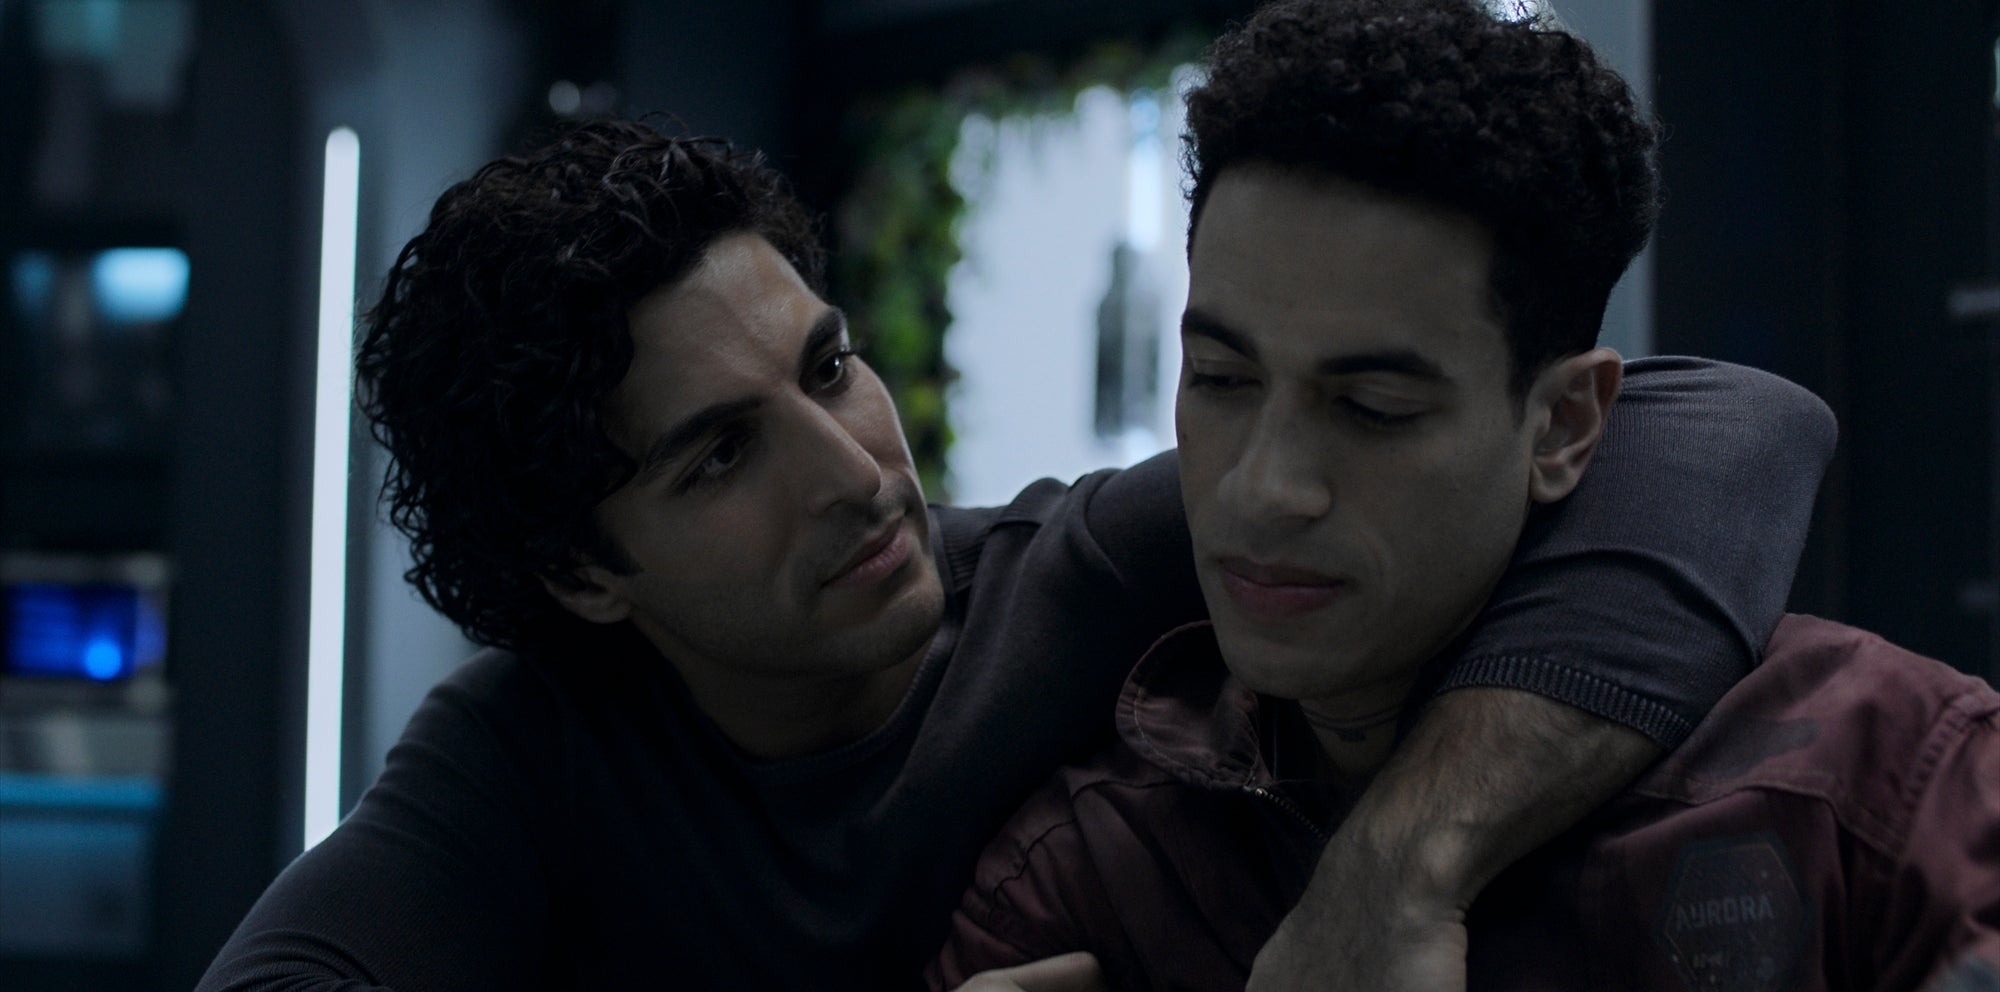 Marco and Filip (Jasai Chase Owens) share a rare tender moment during season five. (Image: Amazon Studios)